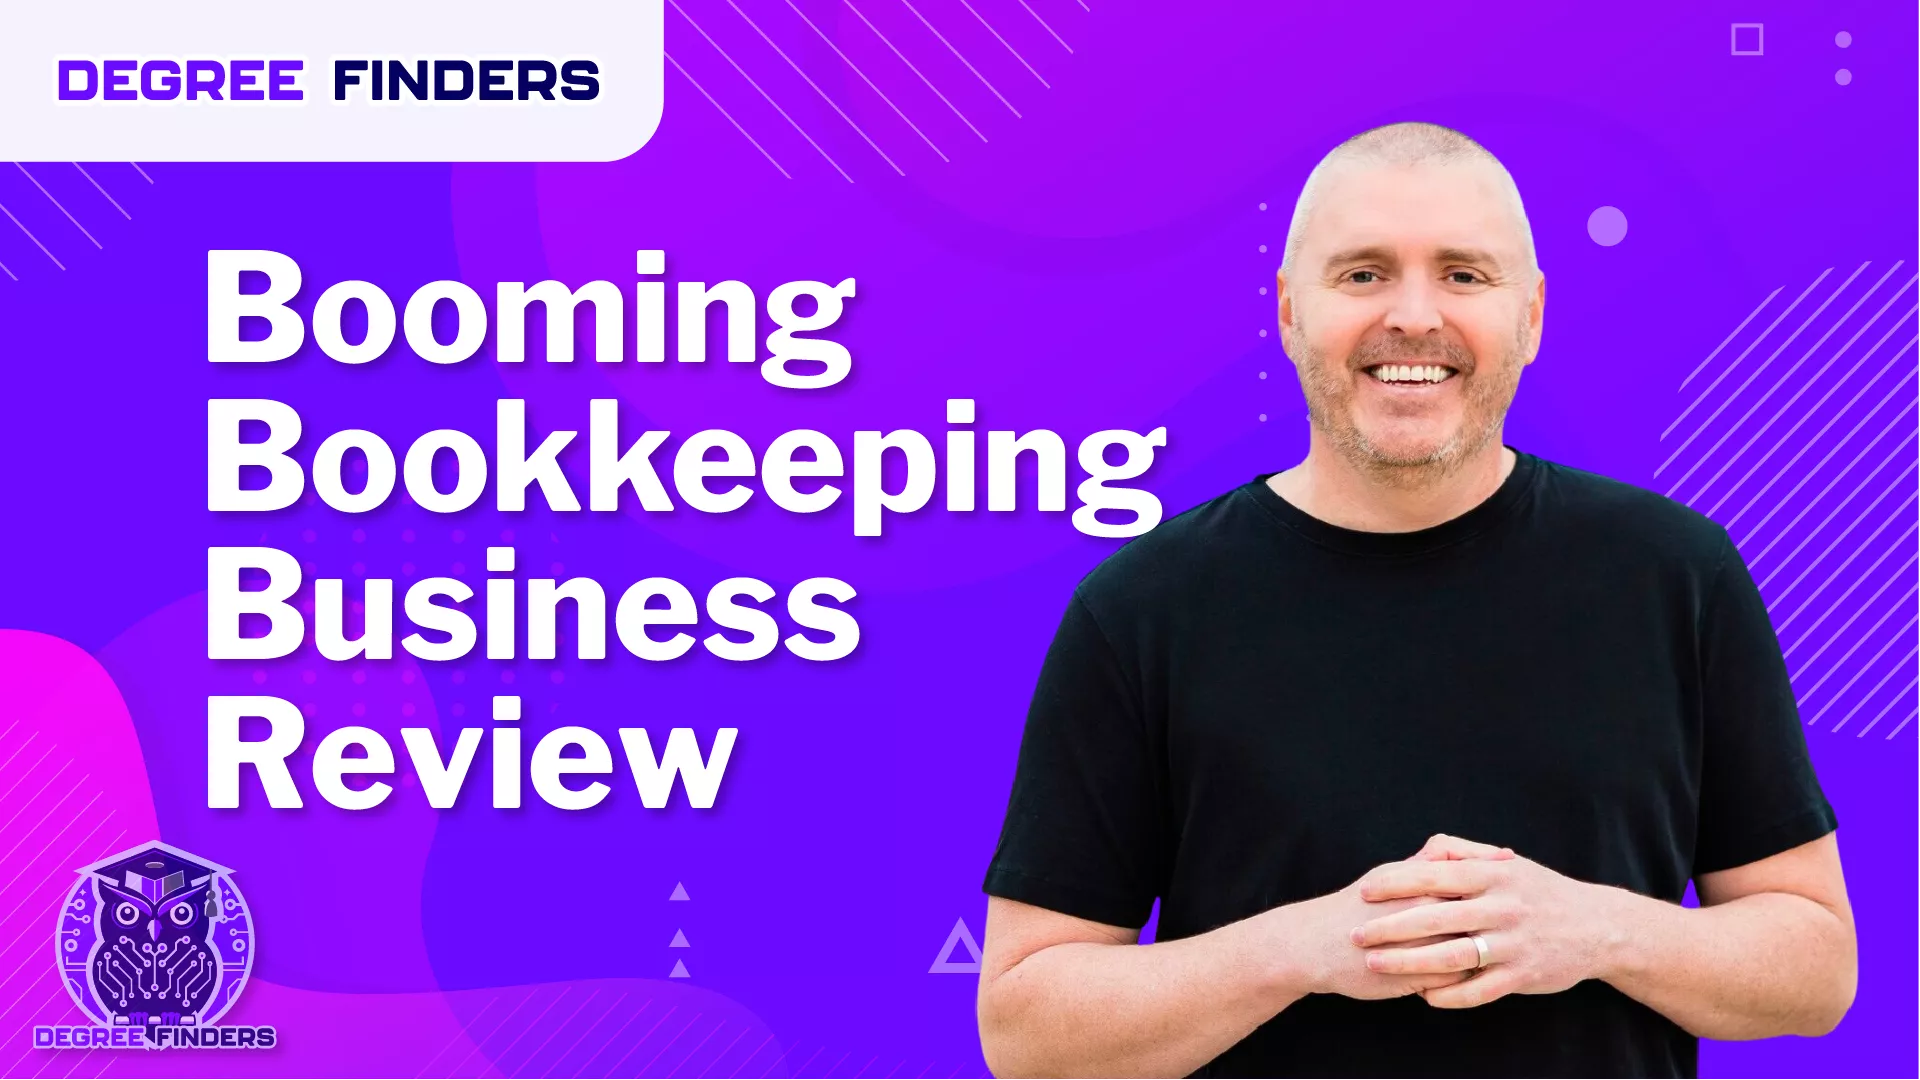 Booming Bookkeeping Business Review